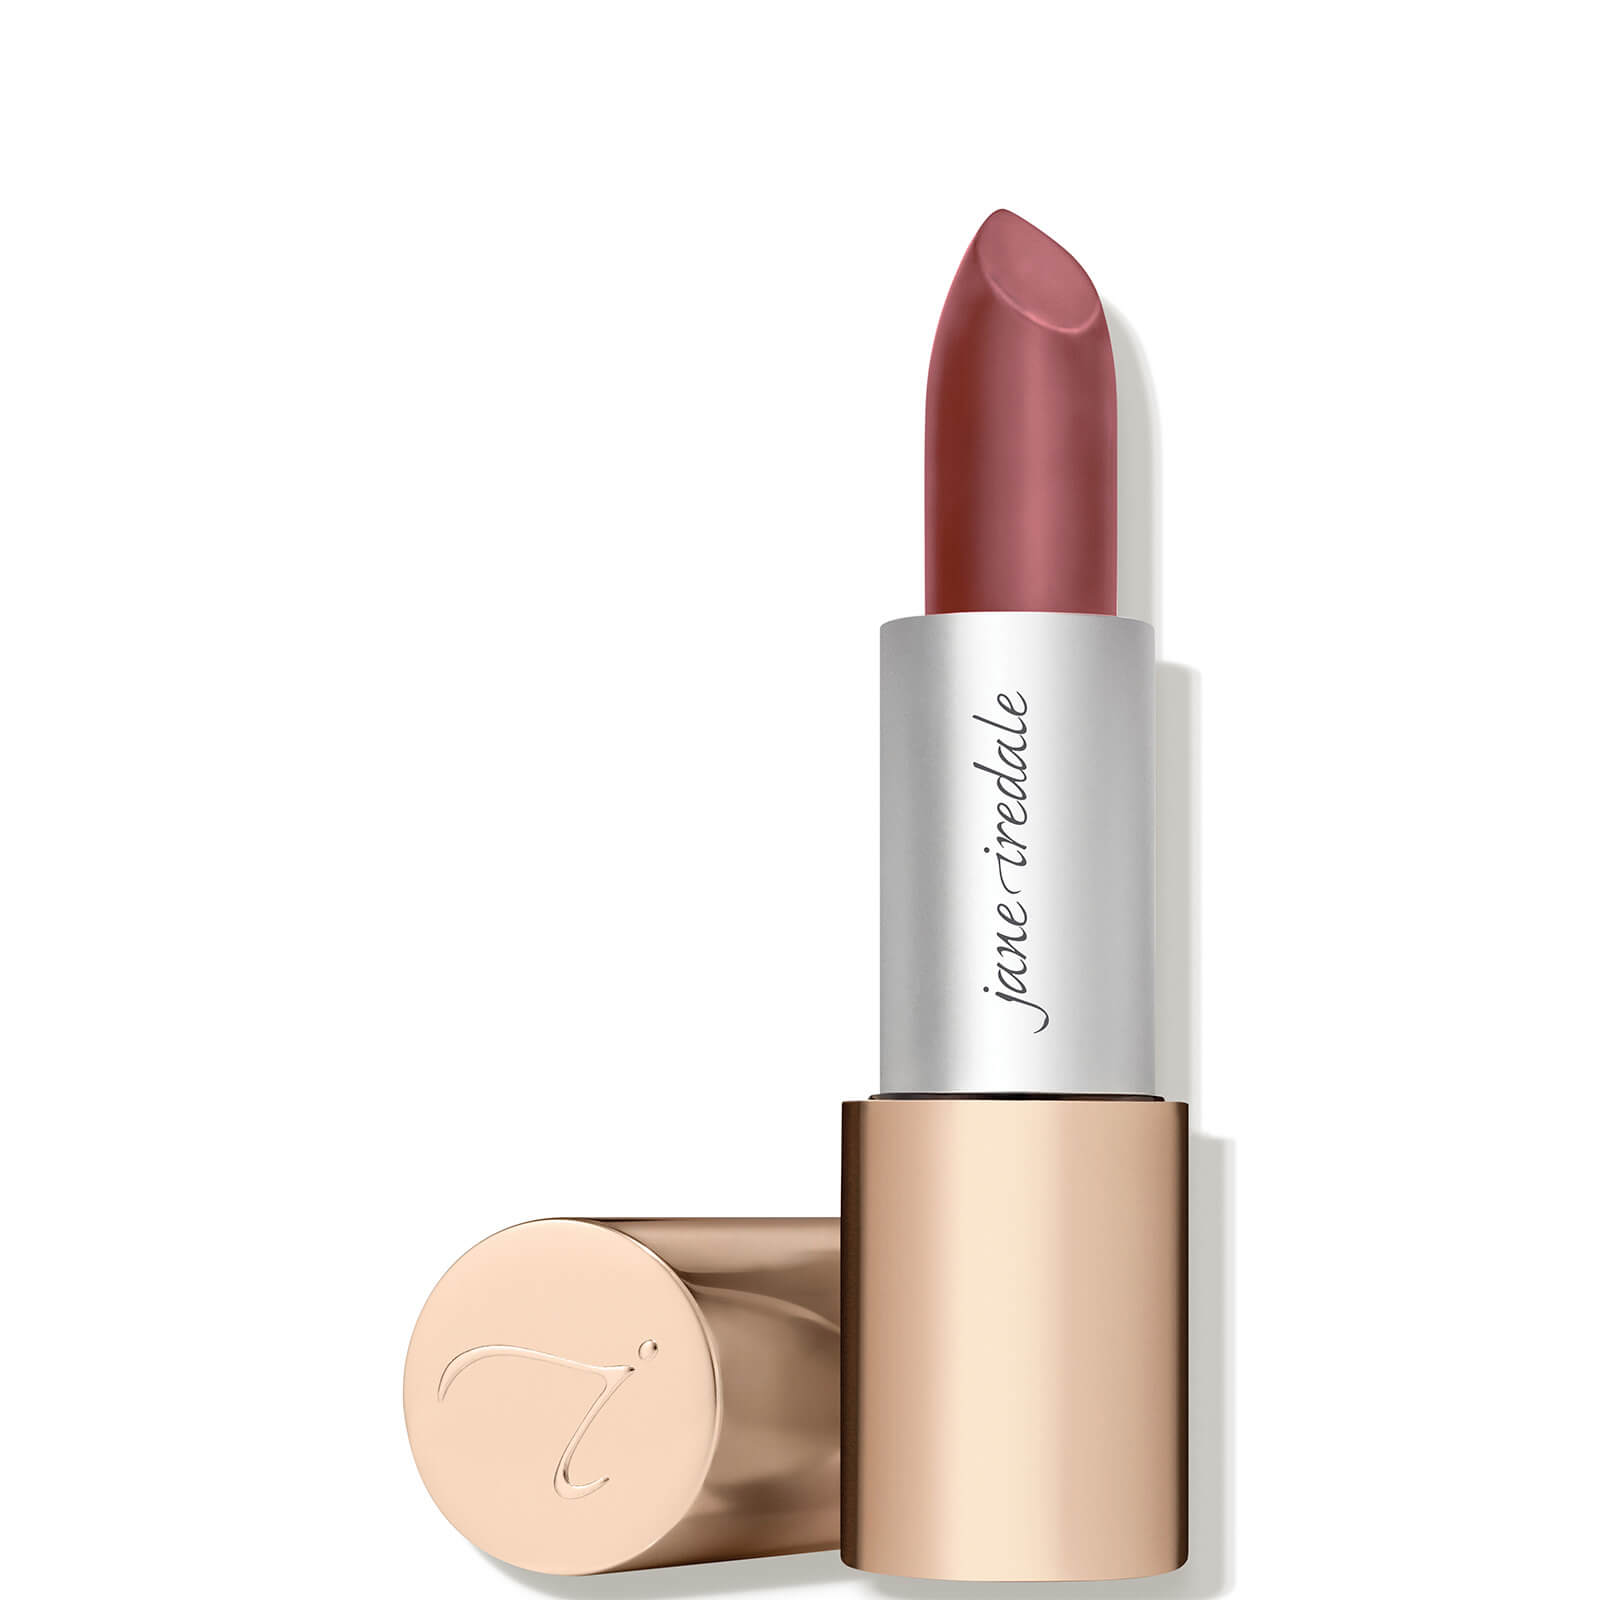 Jane Iredale Triple Luxe Long Lasting Naturally Moist Lipstick (1.13 Oz.) In Susan